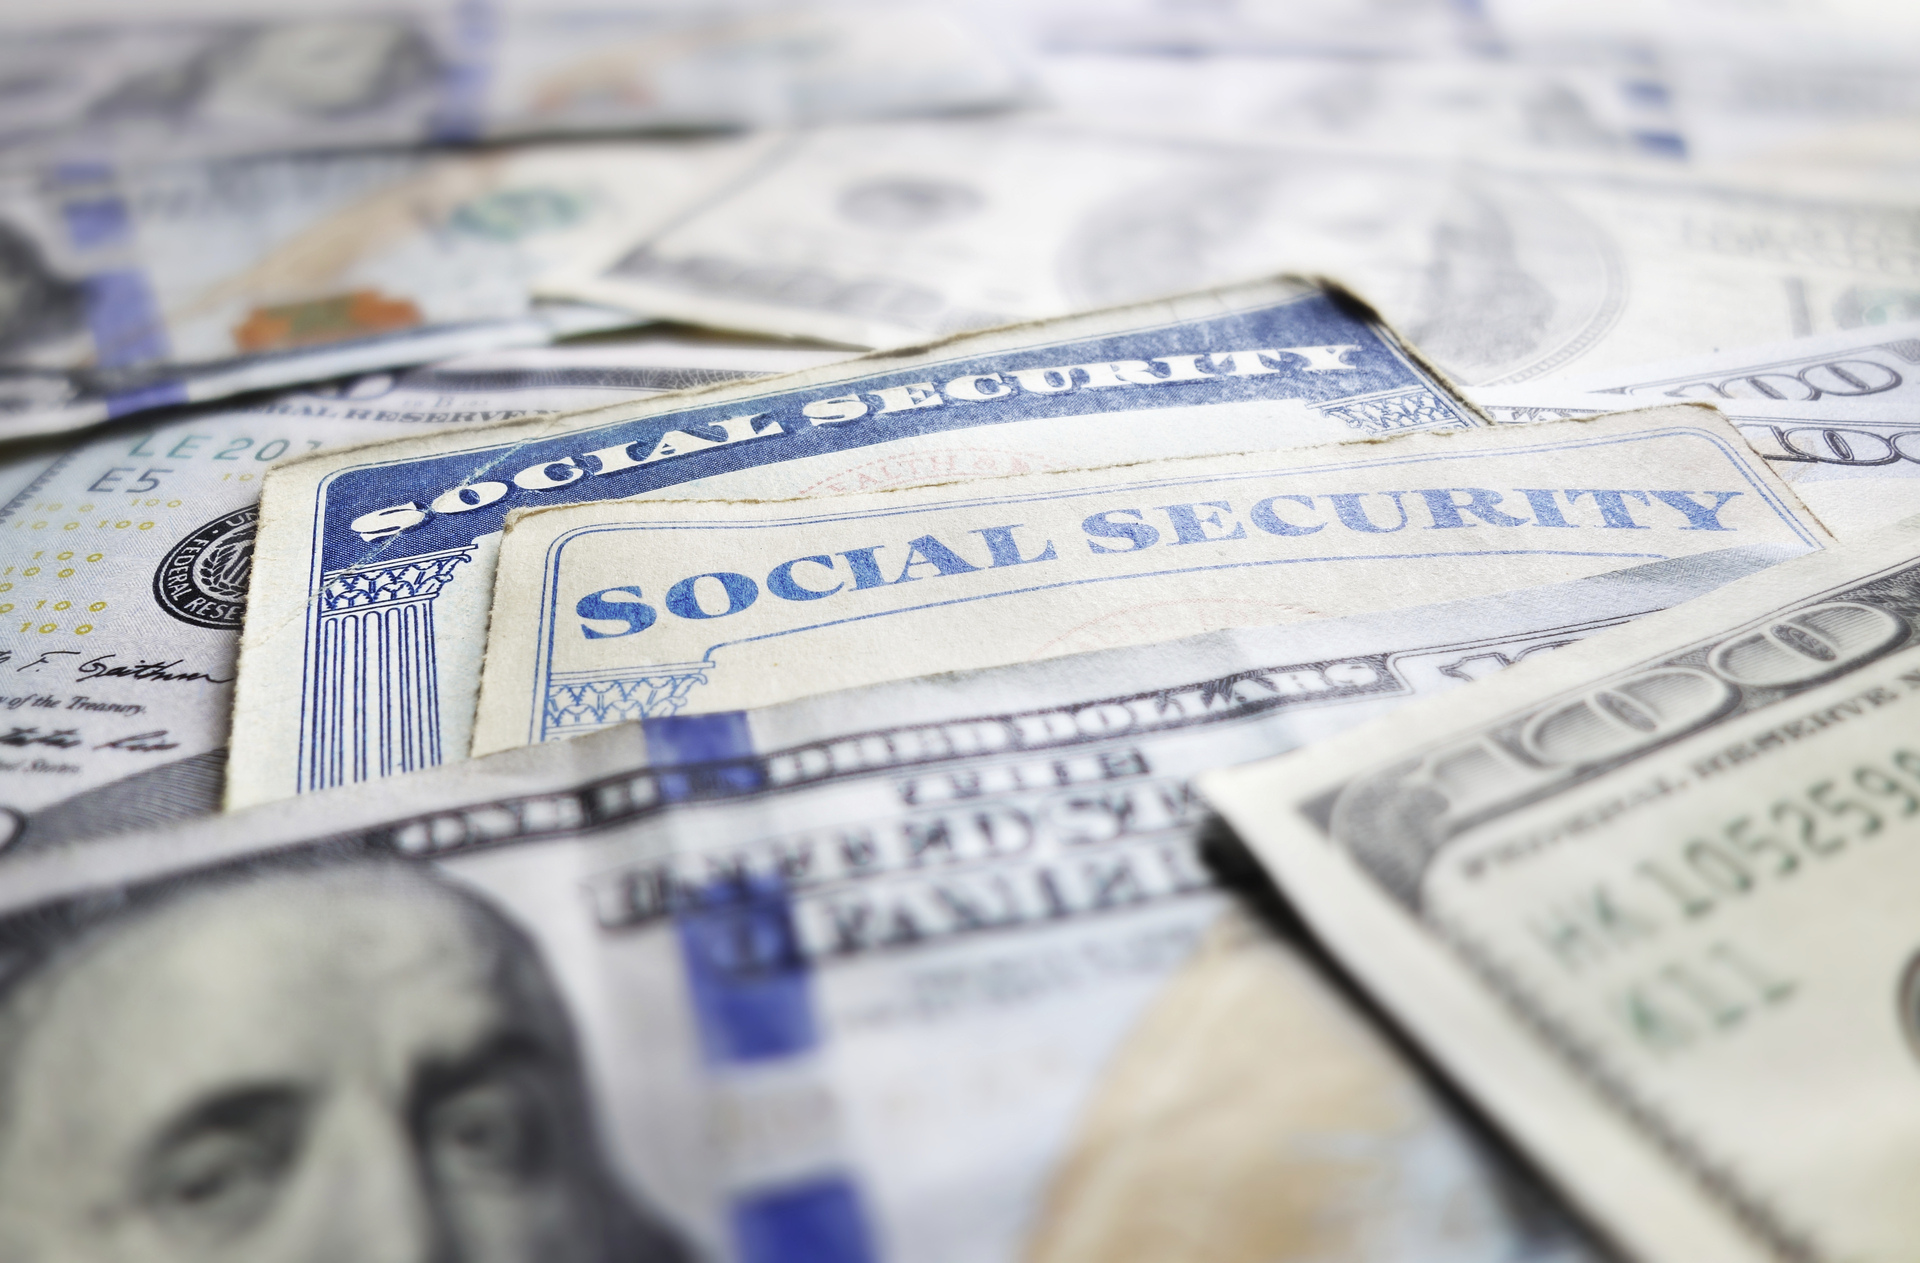 What are some of the Social Security Administration's functions?